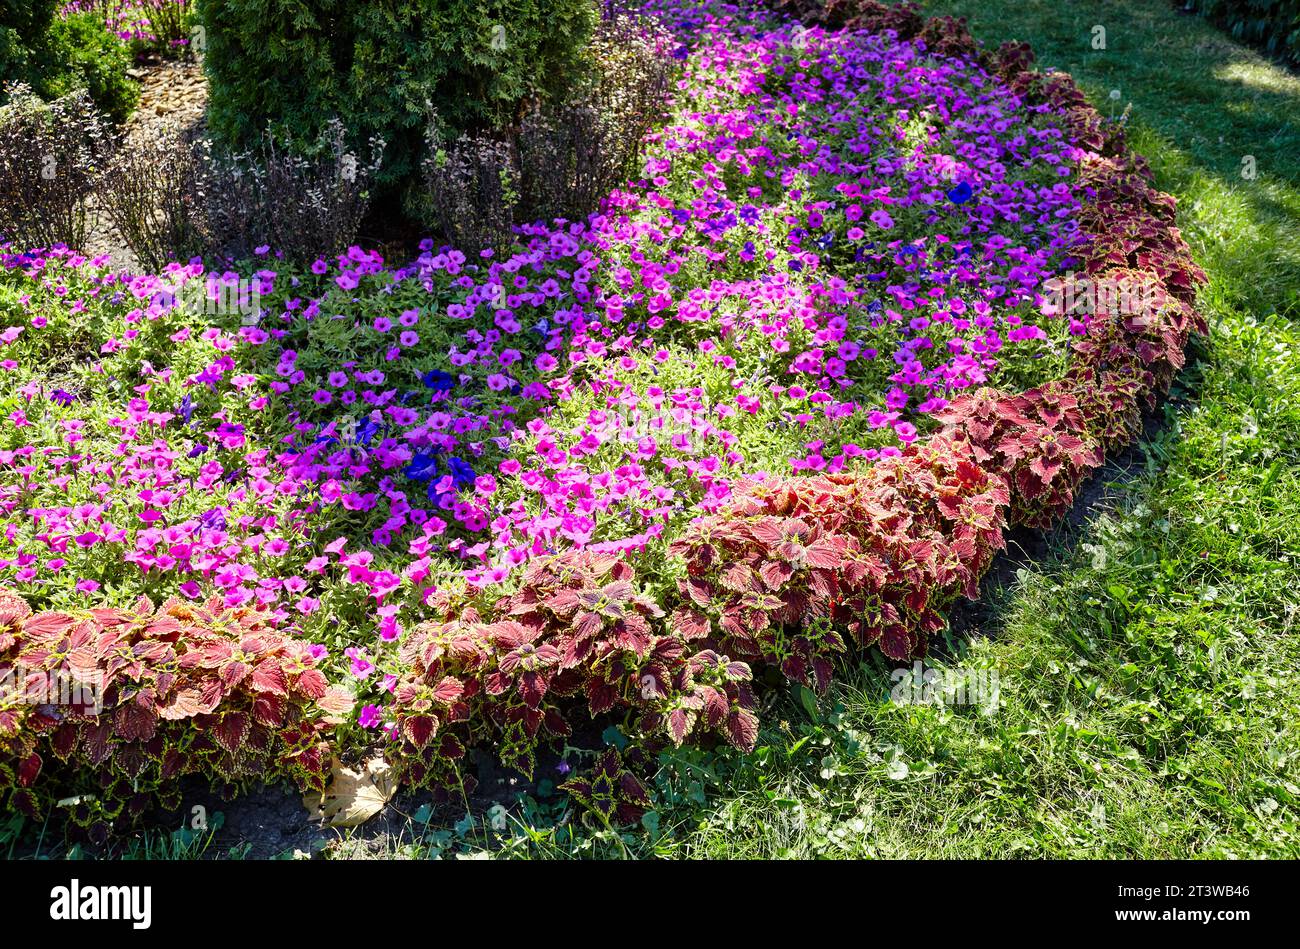 Purple petunias and Coleus or Plectranthus Scutellarioides(Flame nettle) with red-green leaves in city garden. Lush blooming colorful common garden fl Stock Photo